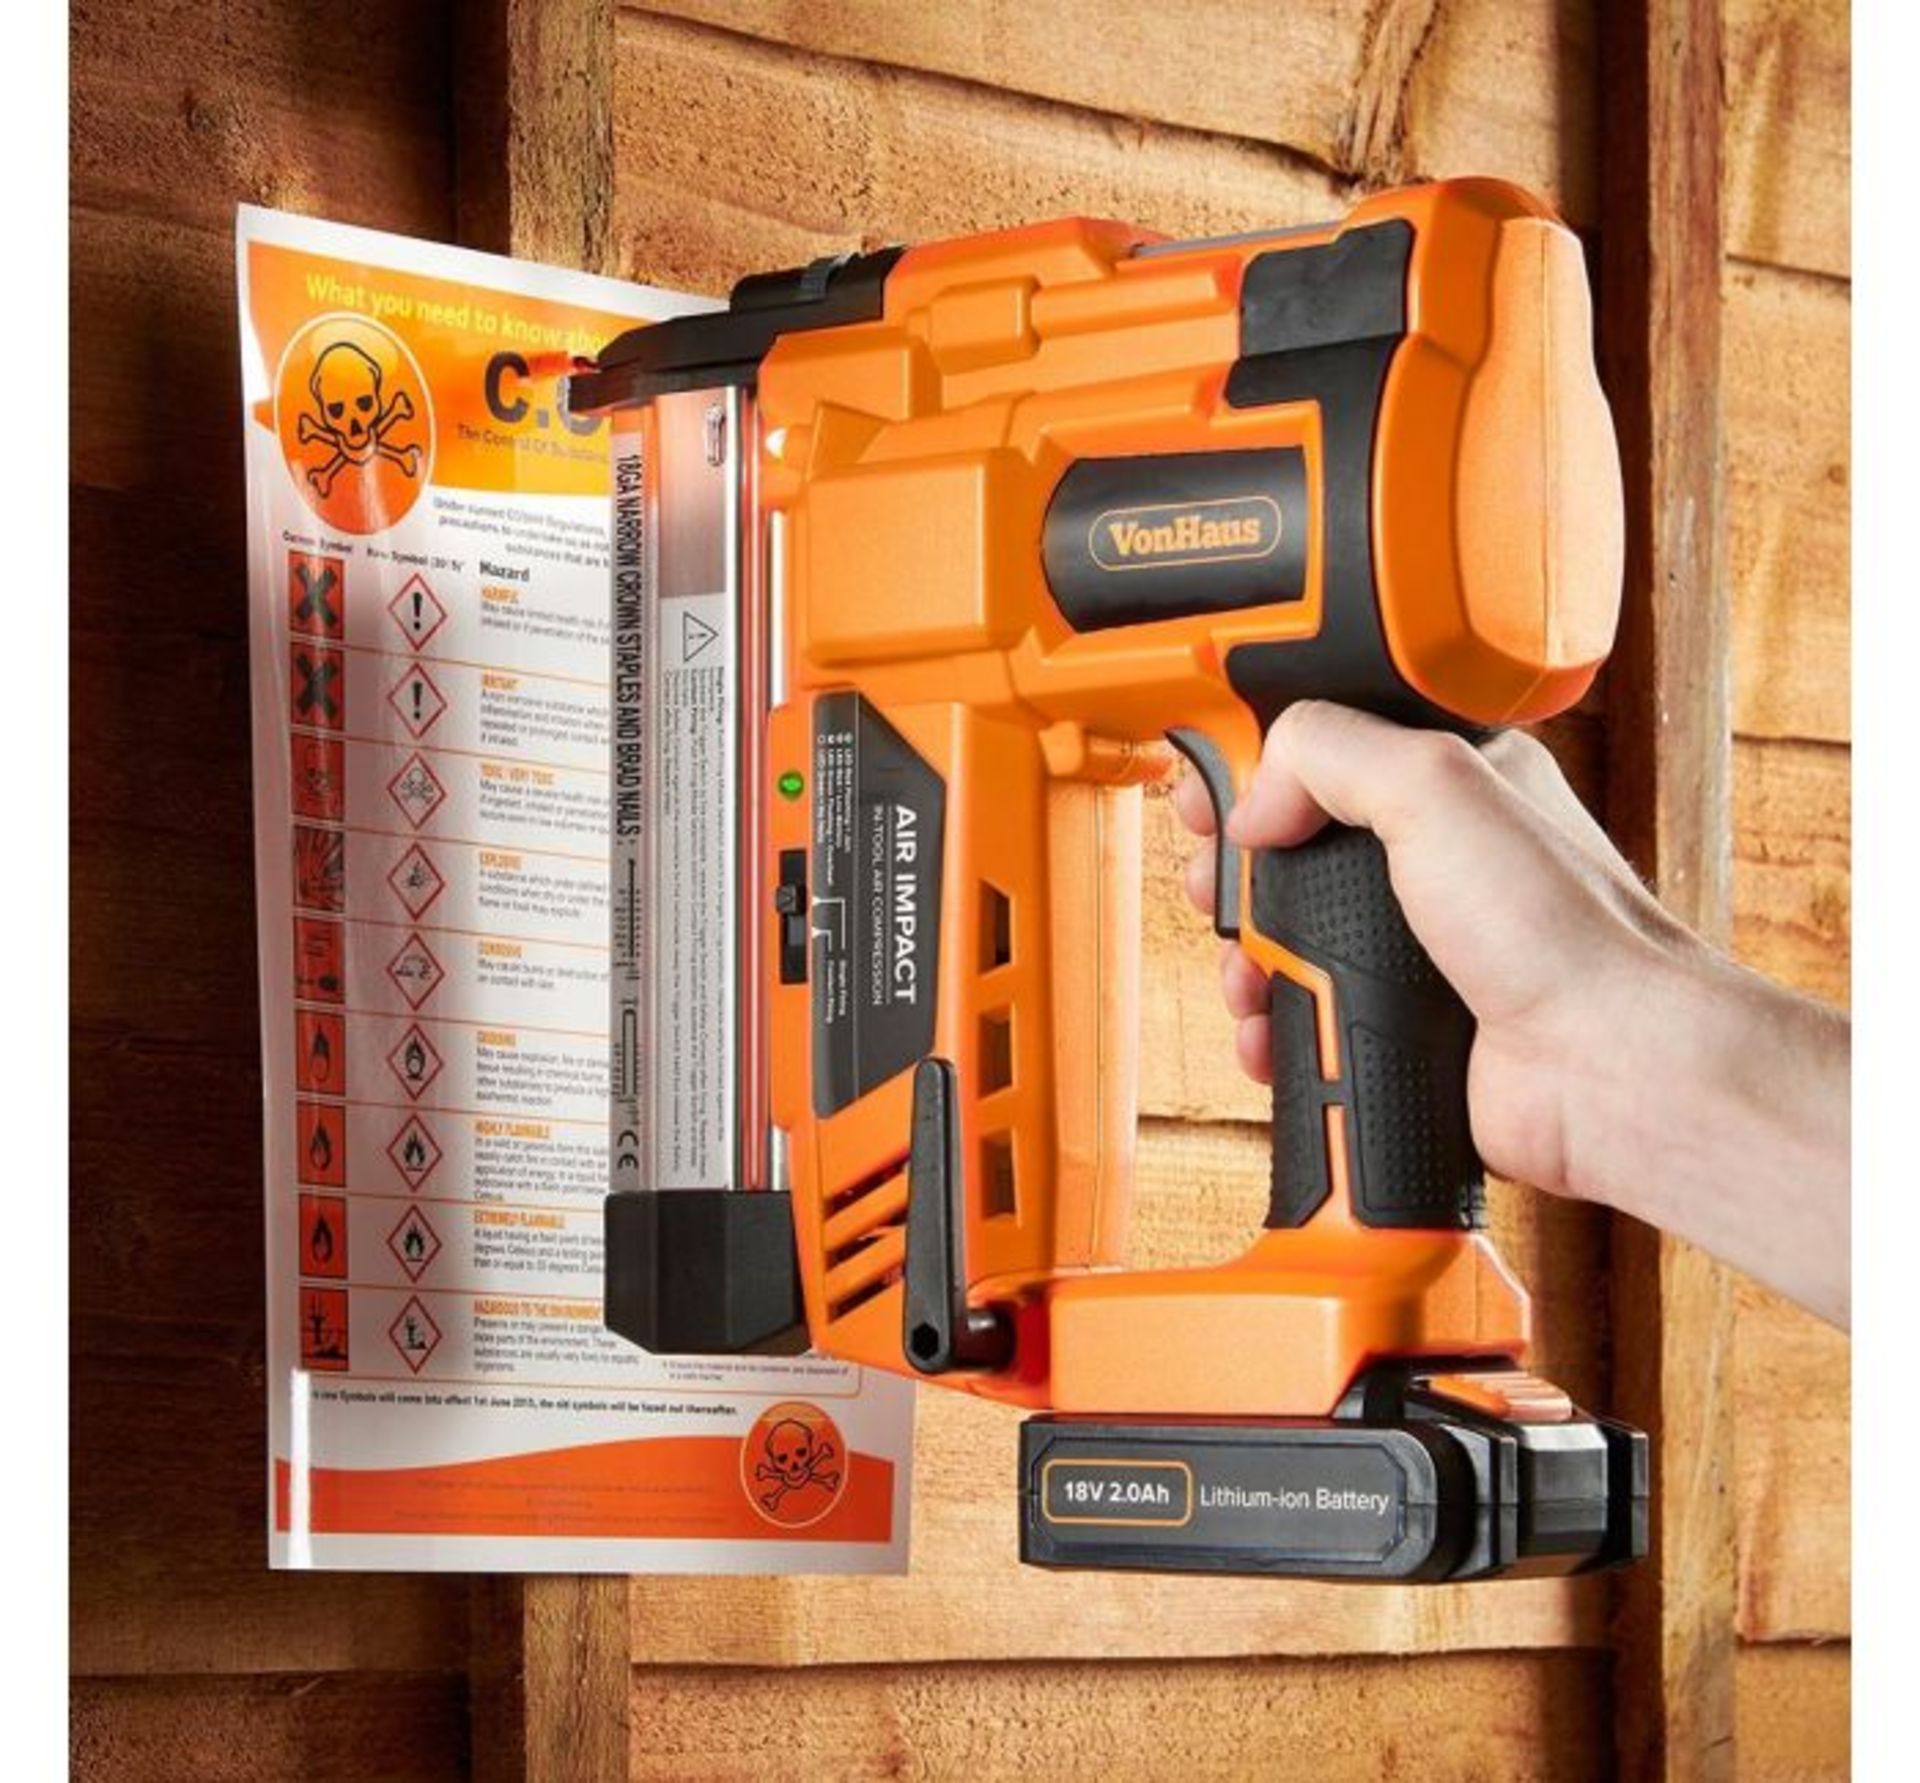 (JH13) Cordless Nail & Staple Gun Features smooth action trigger switch, two firing modes, dep...